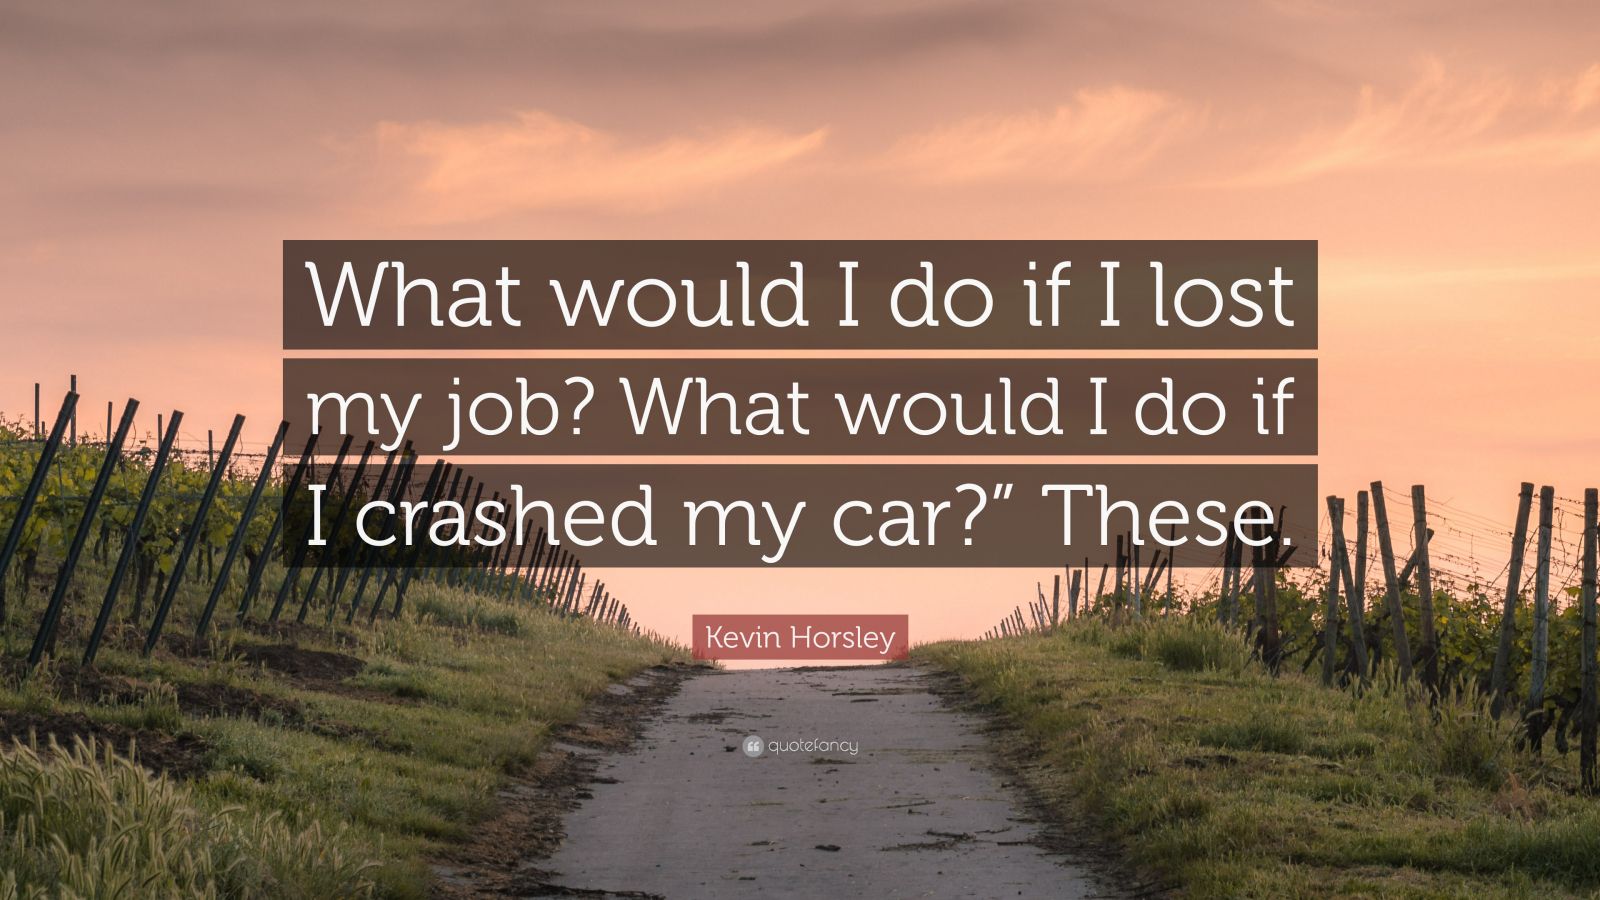 kevin-horsley-quote-what-would-i-do-if-i-lost-my-job-what-would-i-do